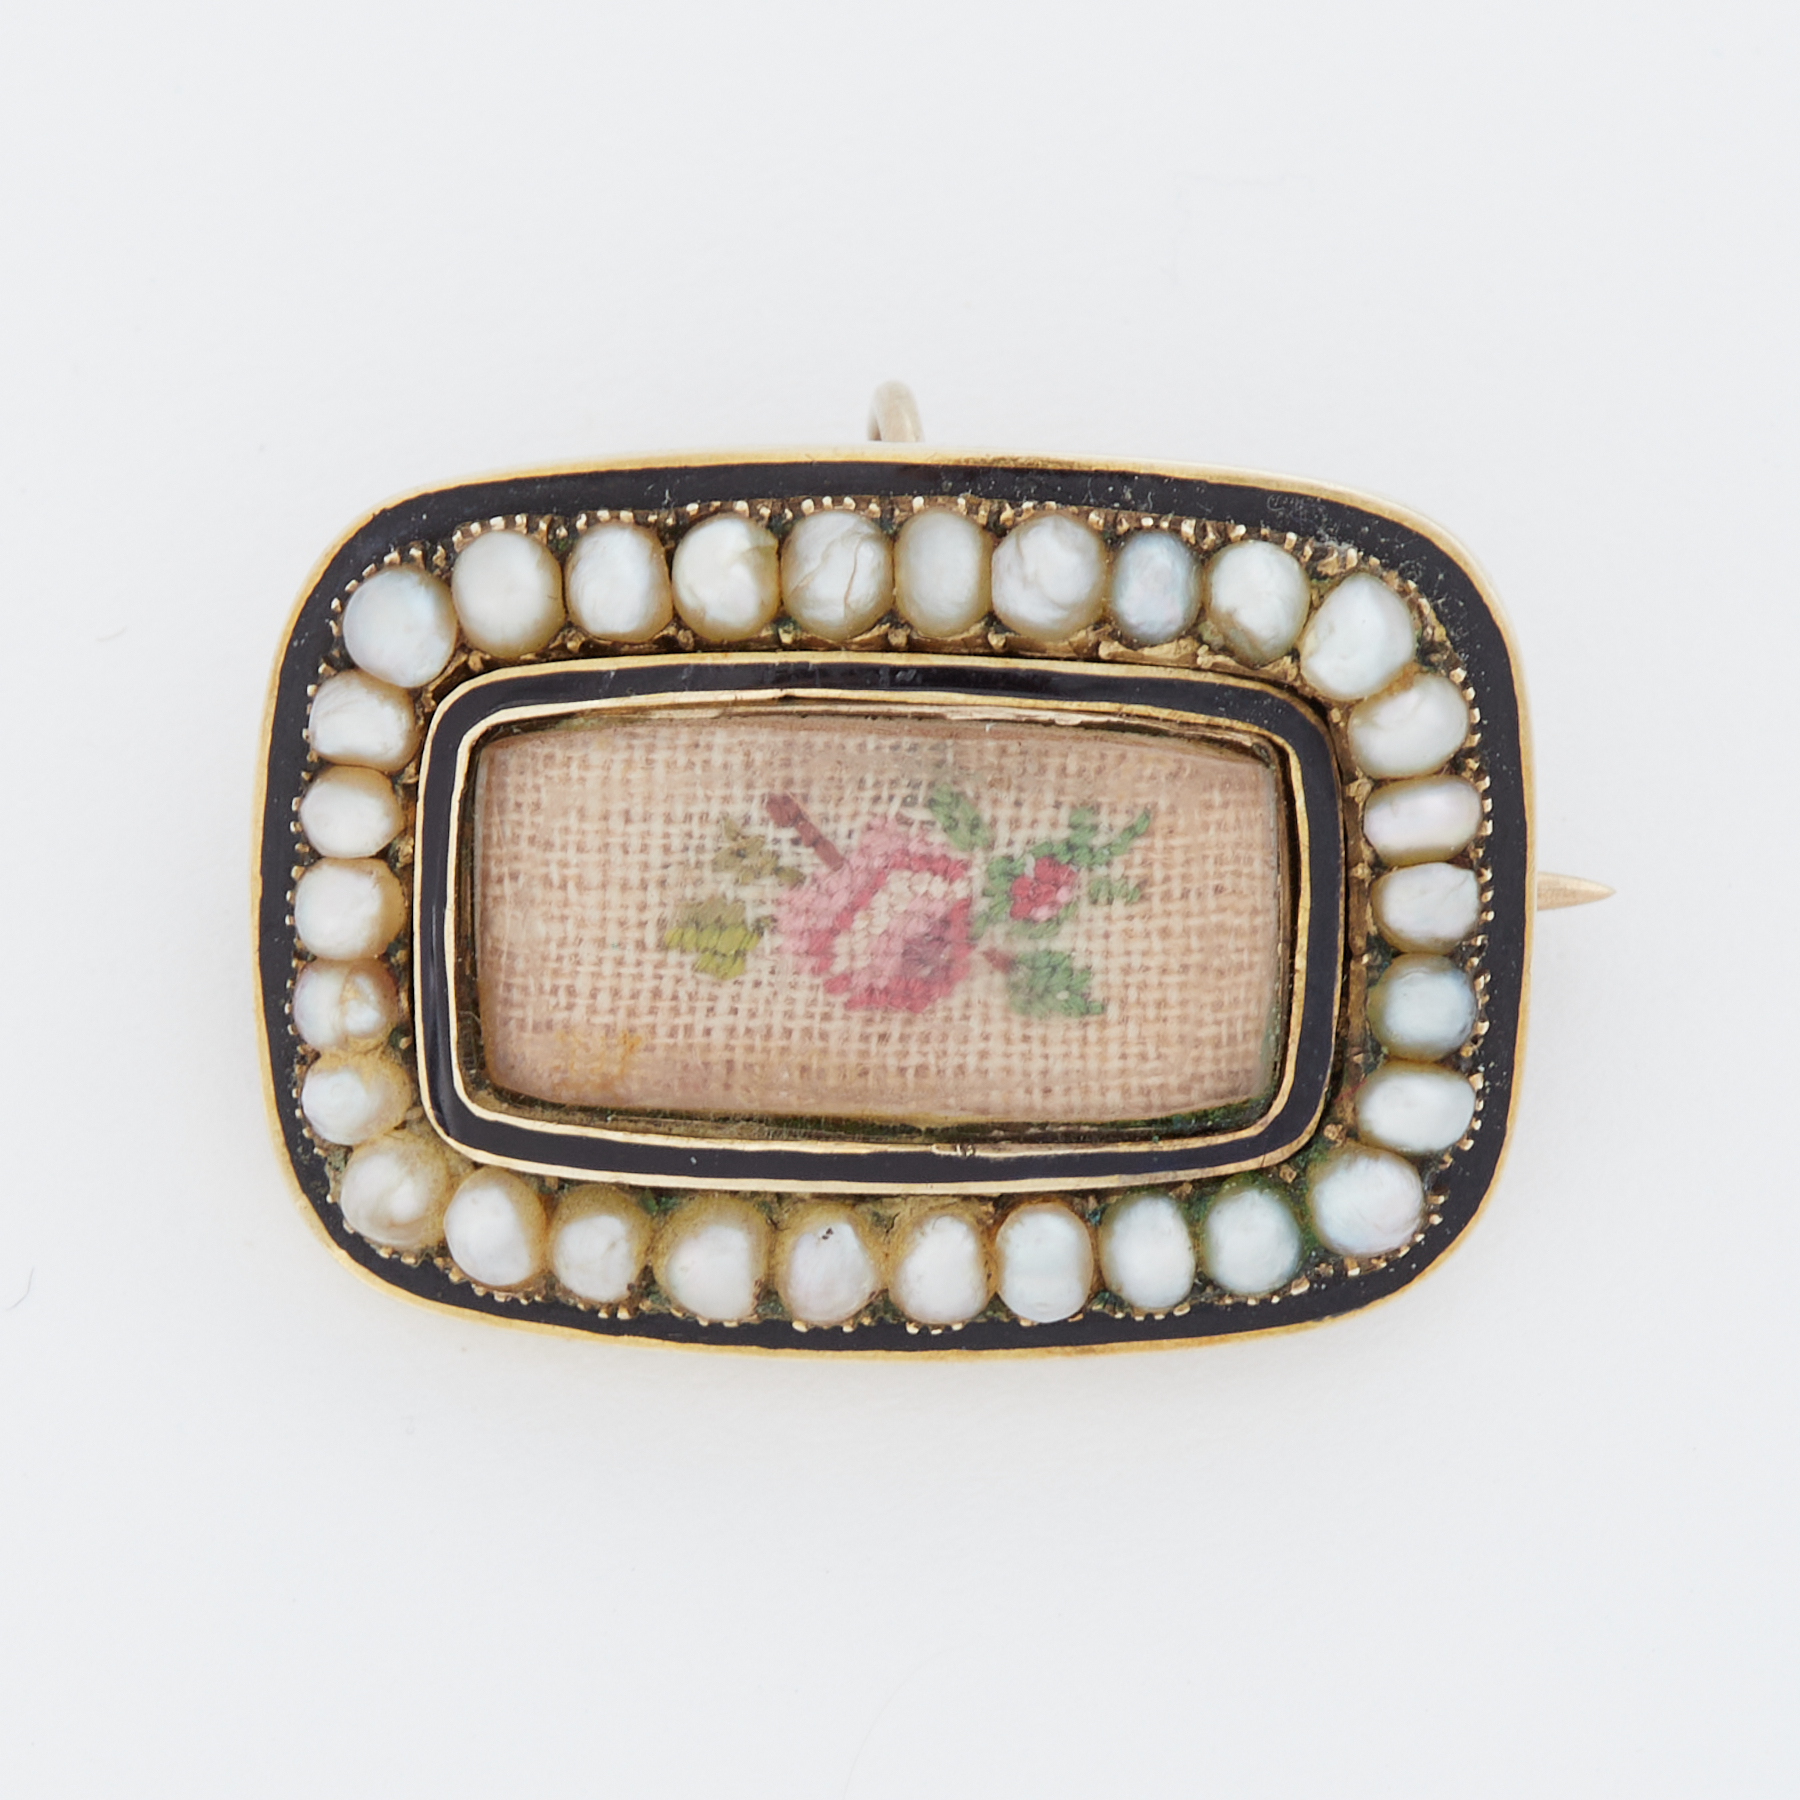 A Georgian yellow gold, black enamel seed pearl & flower tapestry brooch, the tapestry being under a